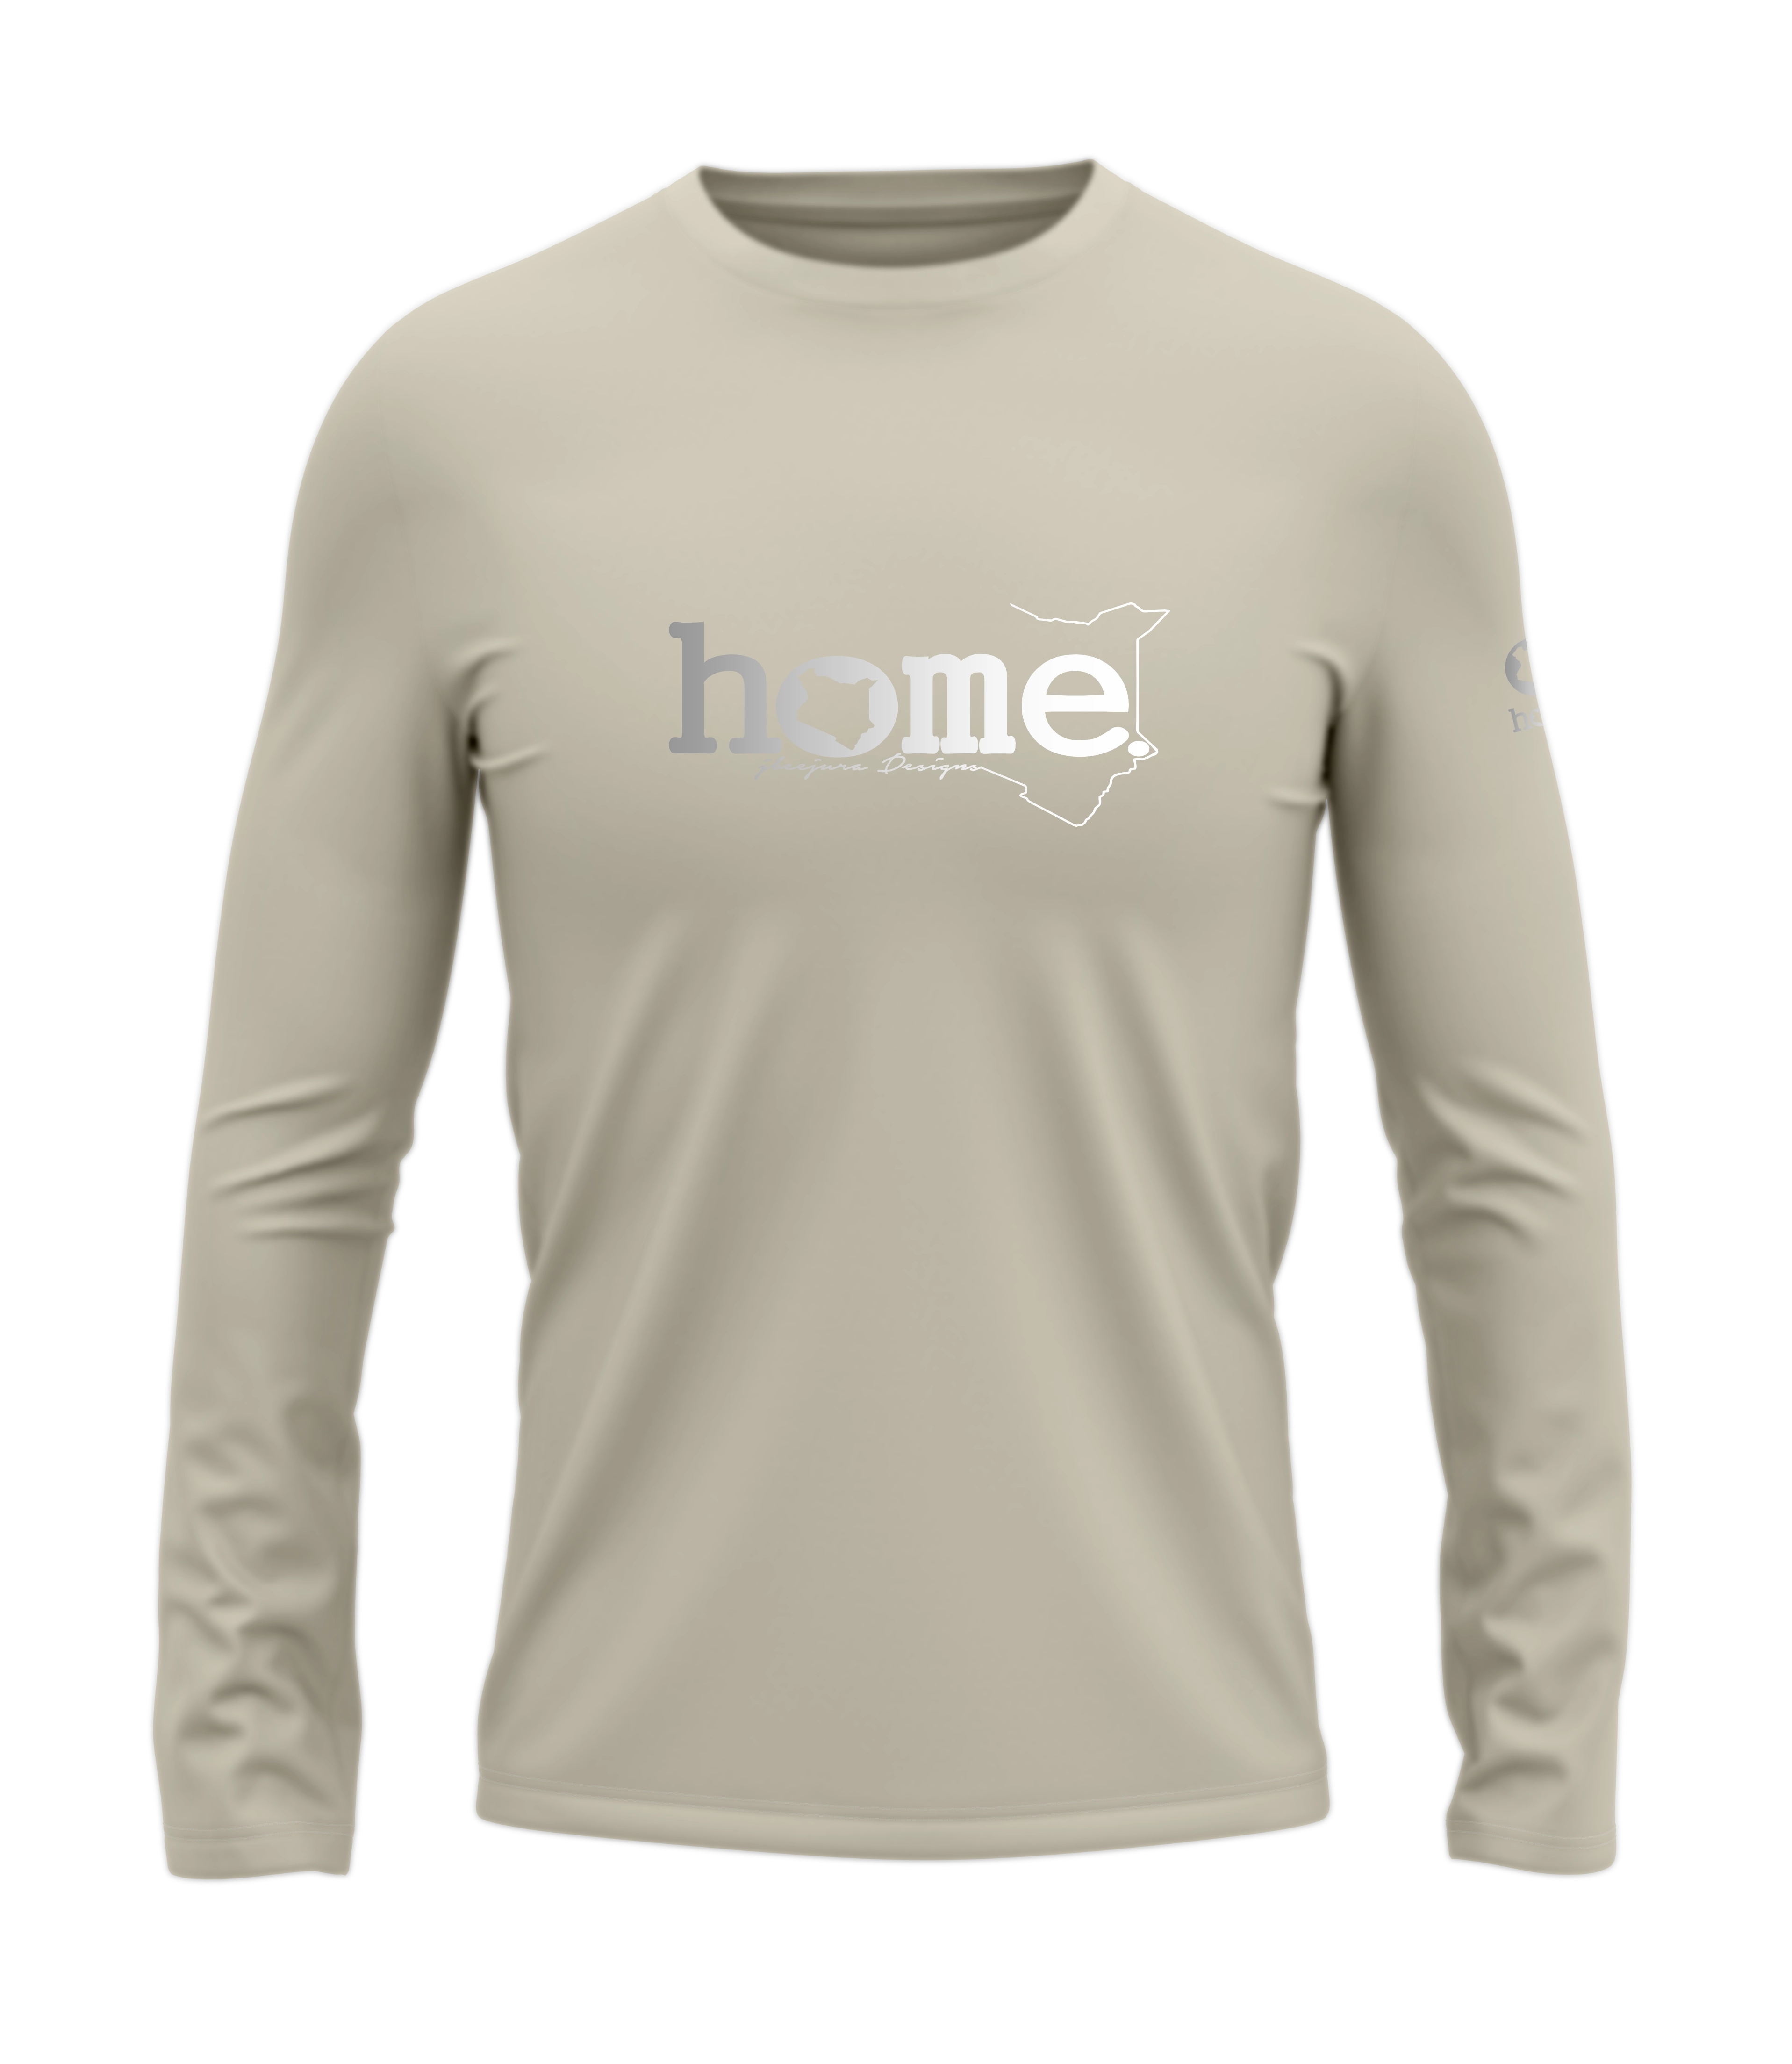 home_254 LONG-SLEEVED NUDE T-SHIRT WITH A SILVER CLASSIC WORDS PRINT – COTTON PLUS FABRIC